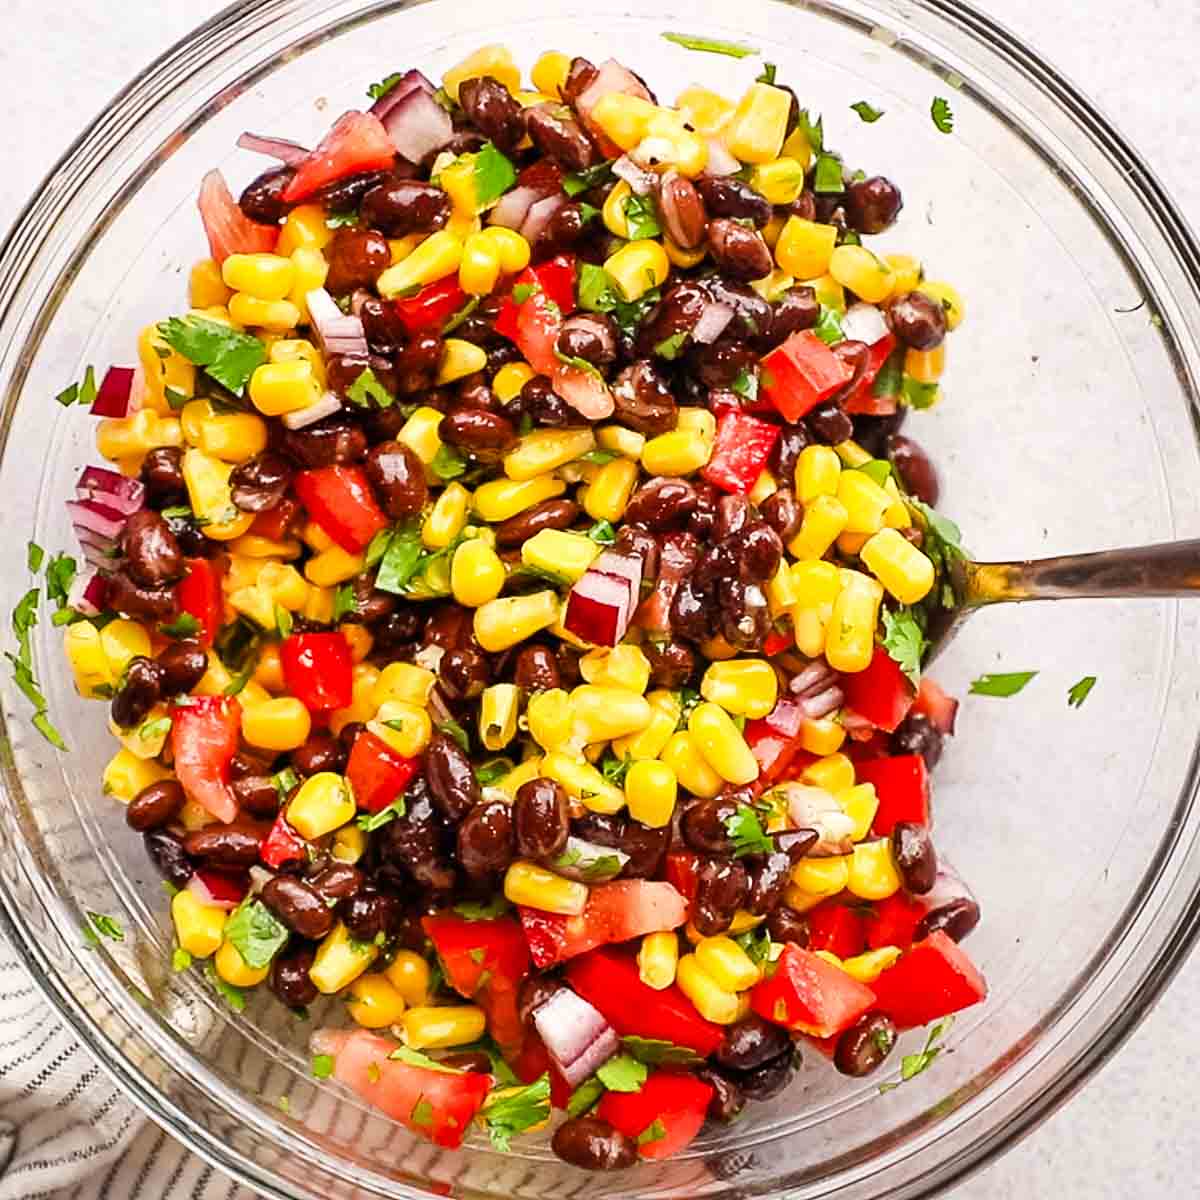 Corn and black bean salsa in a bowl with serving utensils.